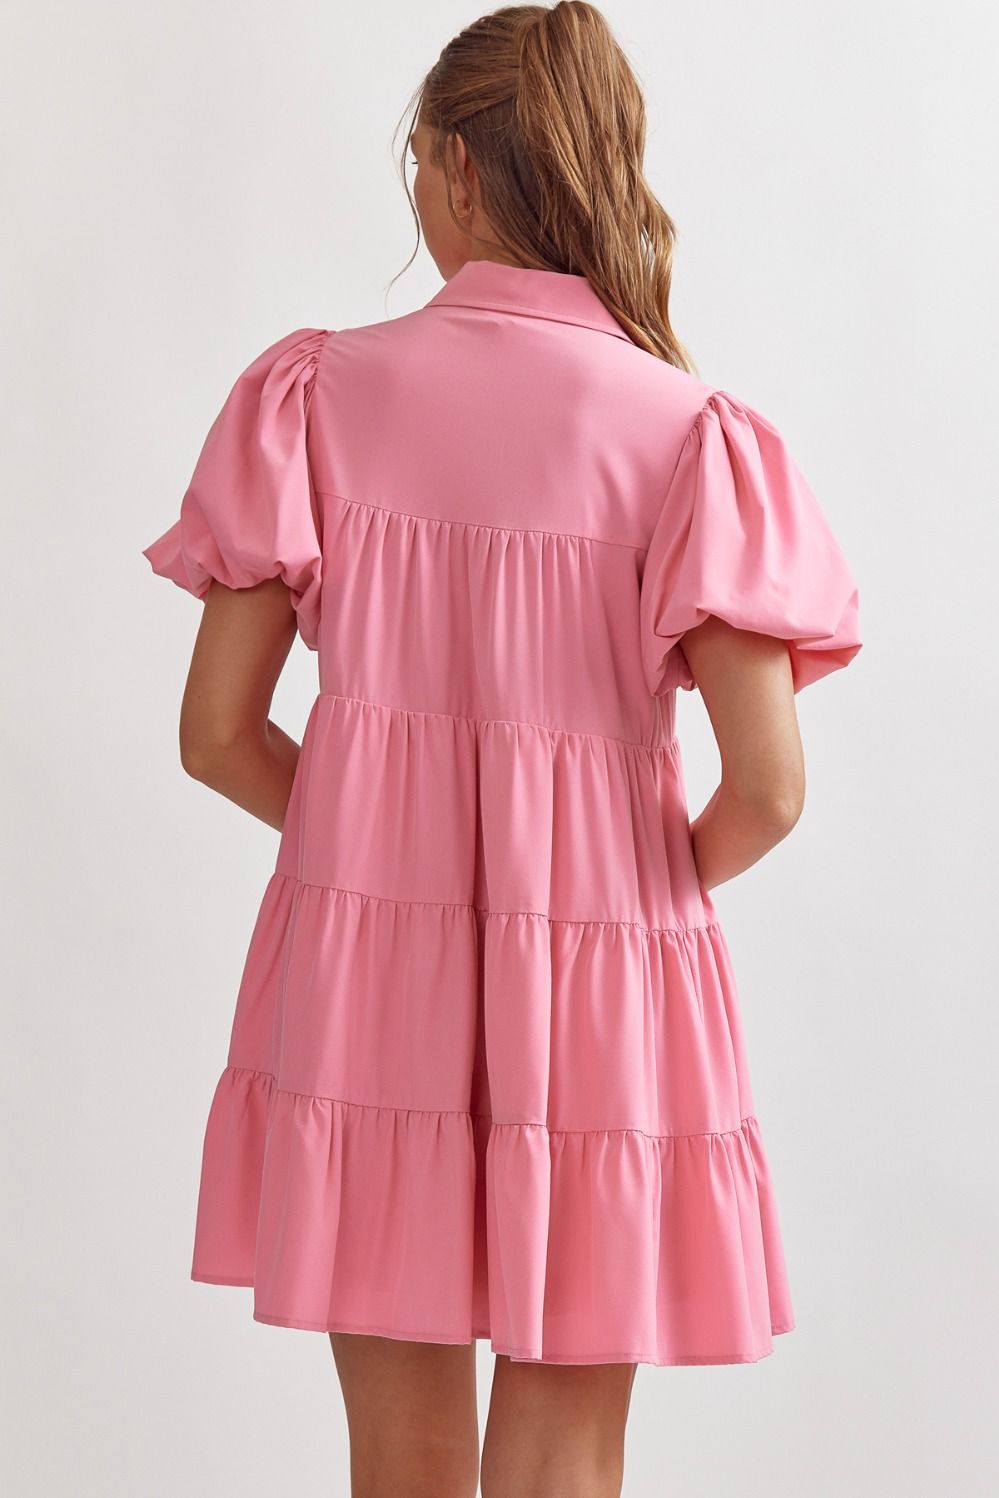 SOLID BUTTON UP TIERED MINI DRESS FEAT. PUFF SLEEVES - PINK